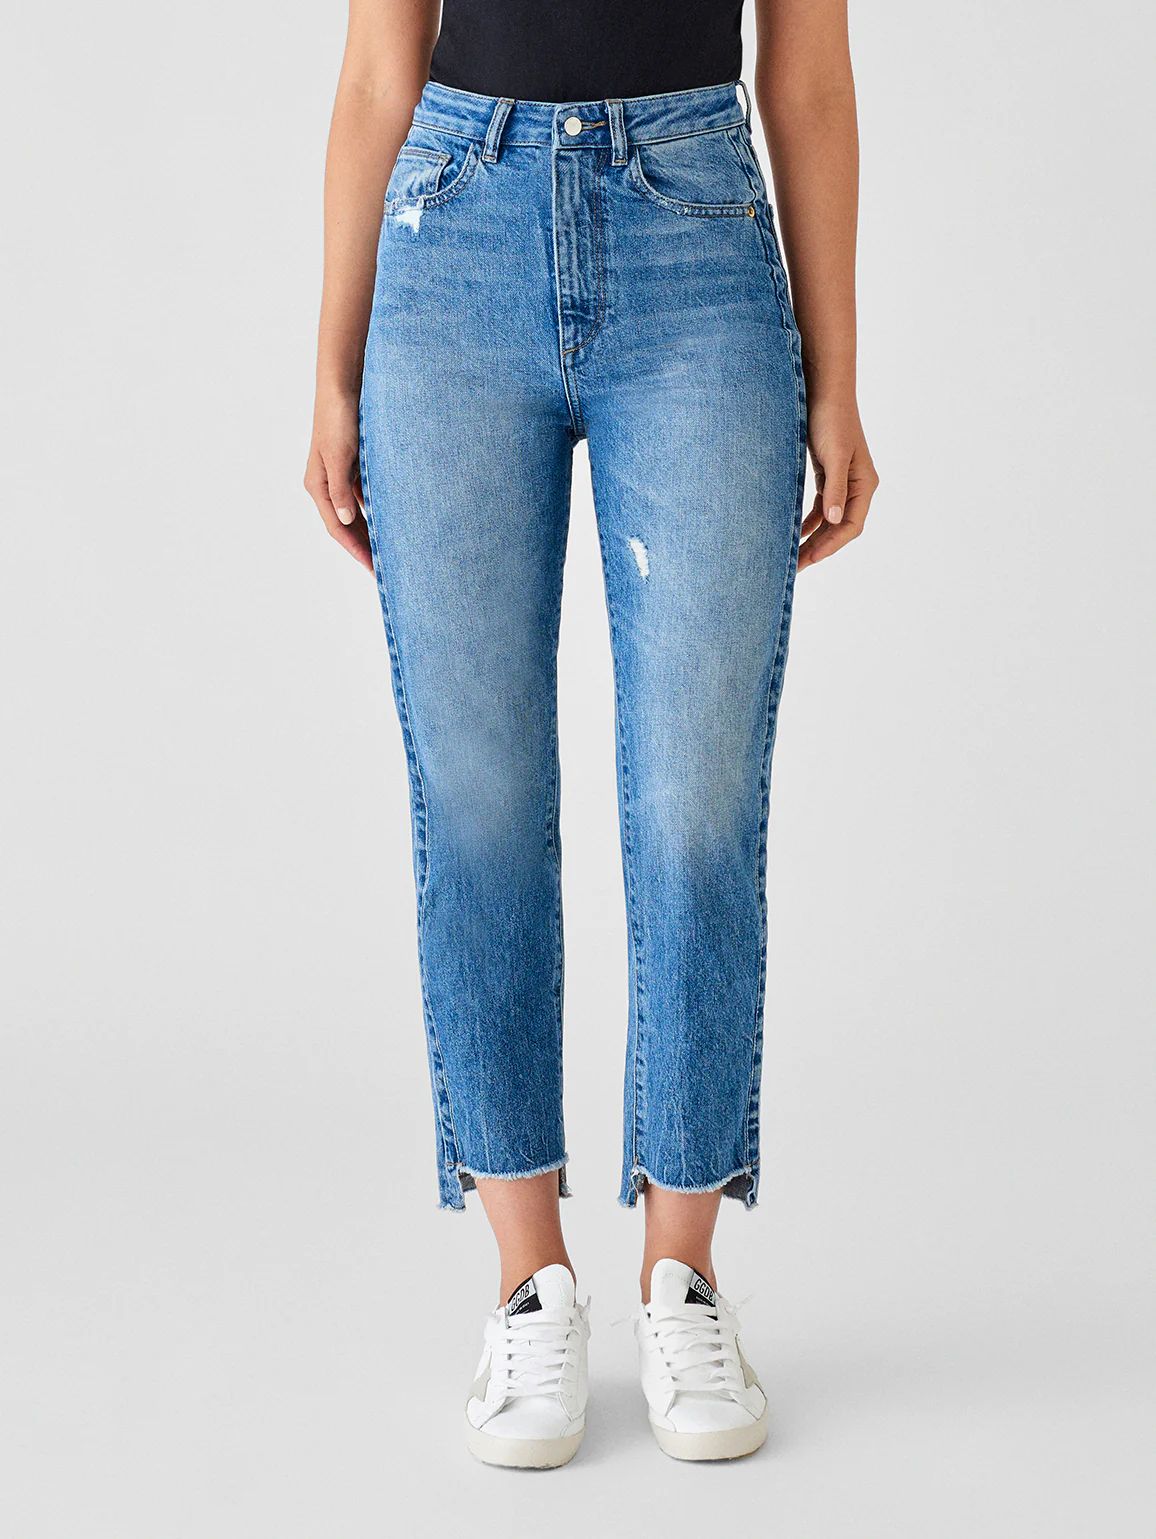 Susie High Rise Tapered Straight | Addison | DL 1961 Women